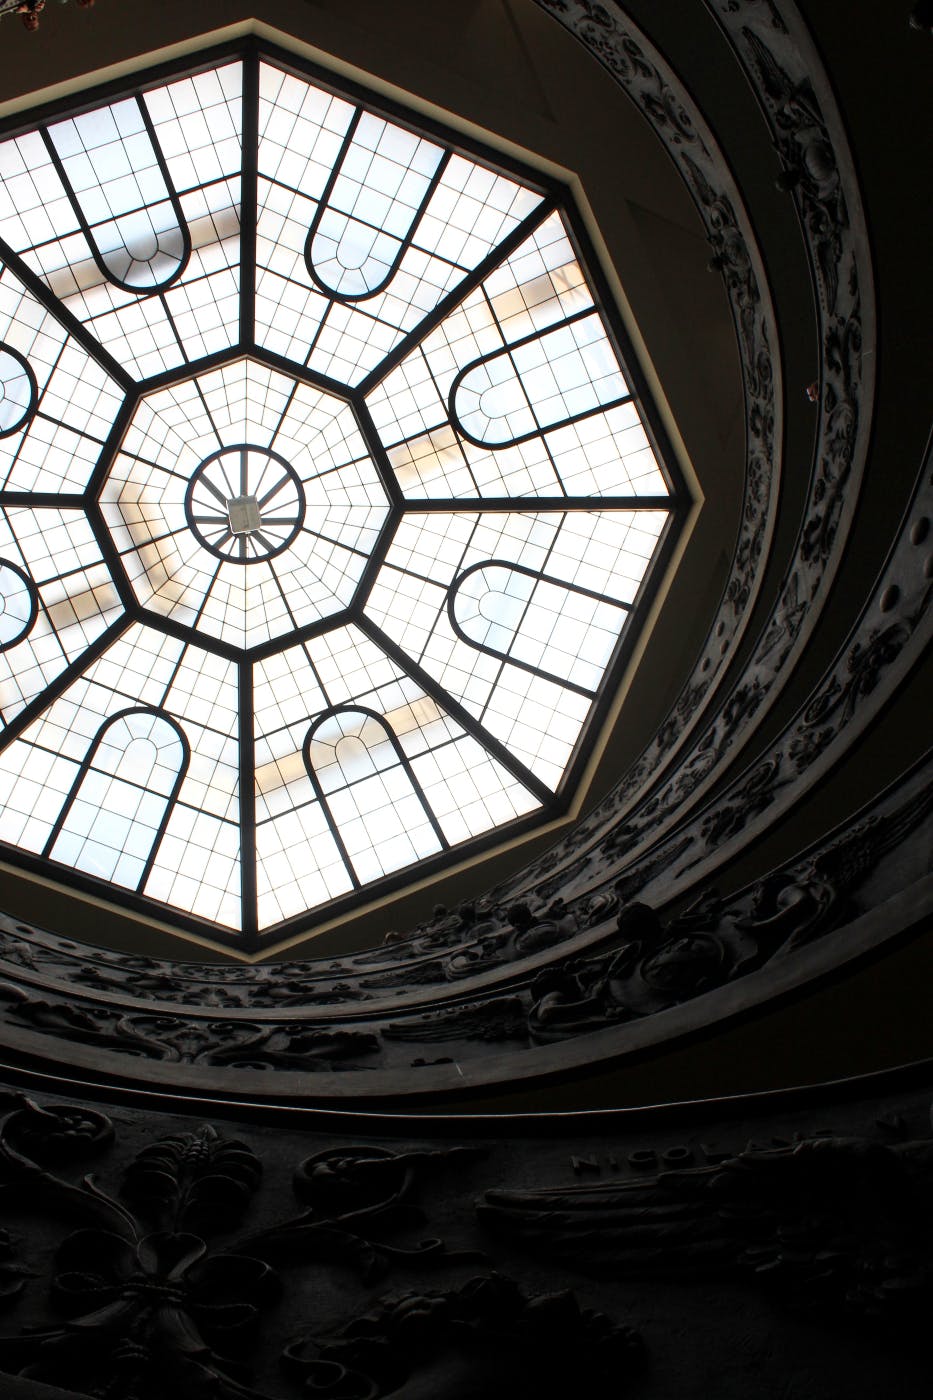 An ornate glass ceiling